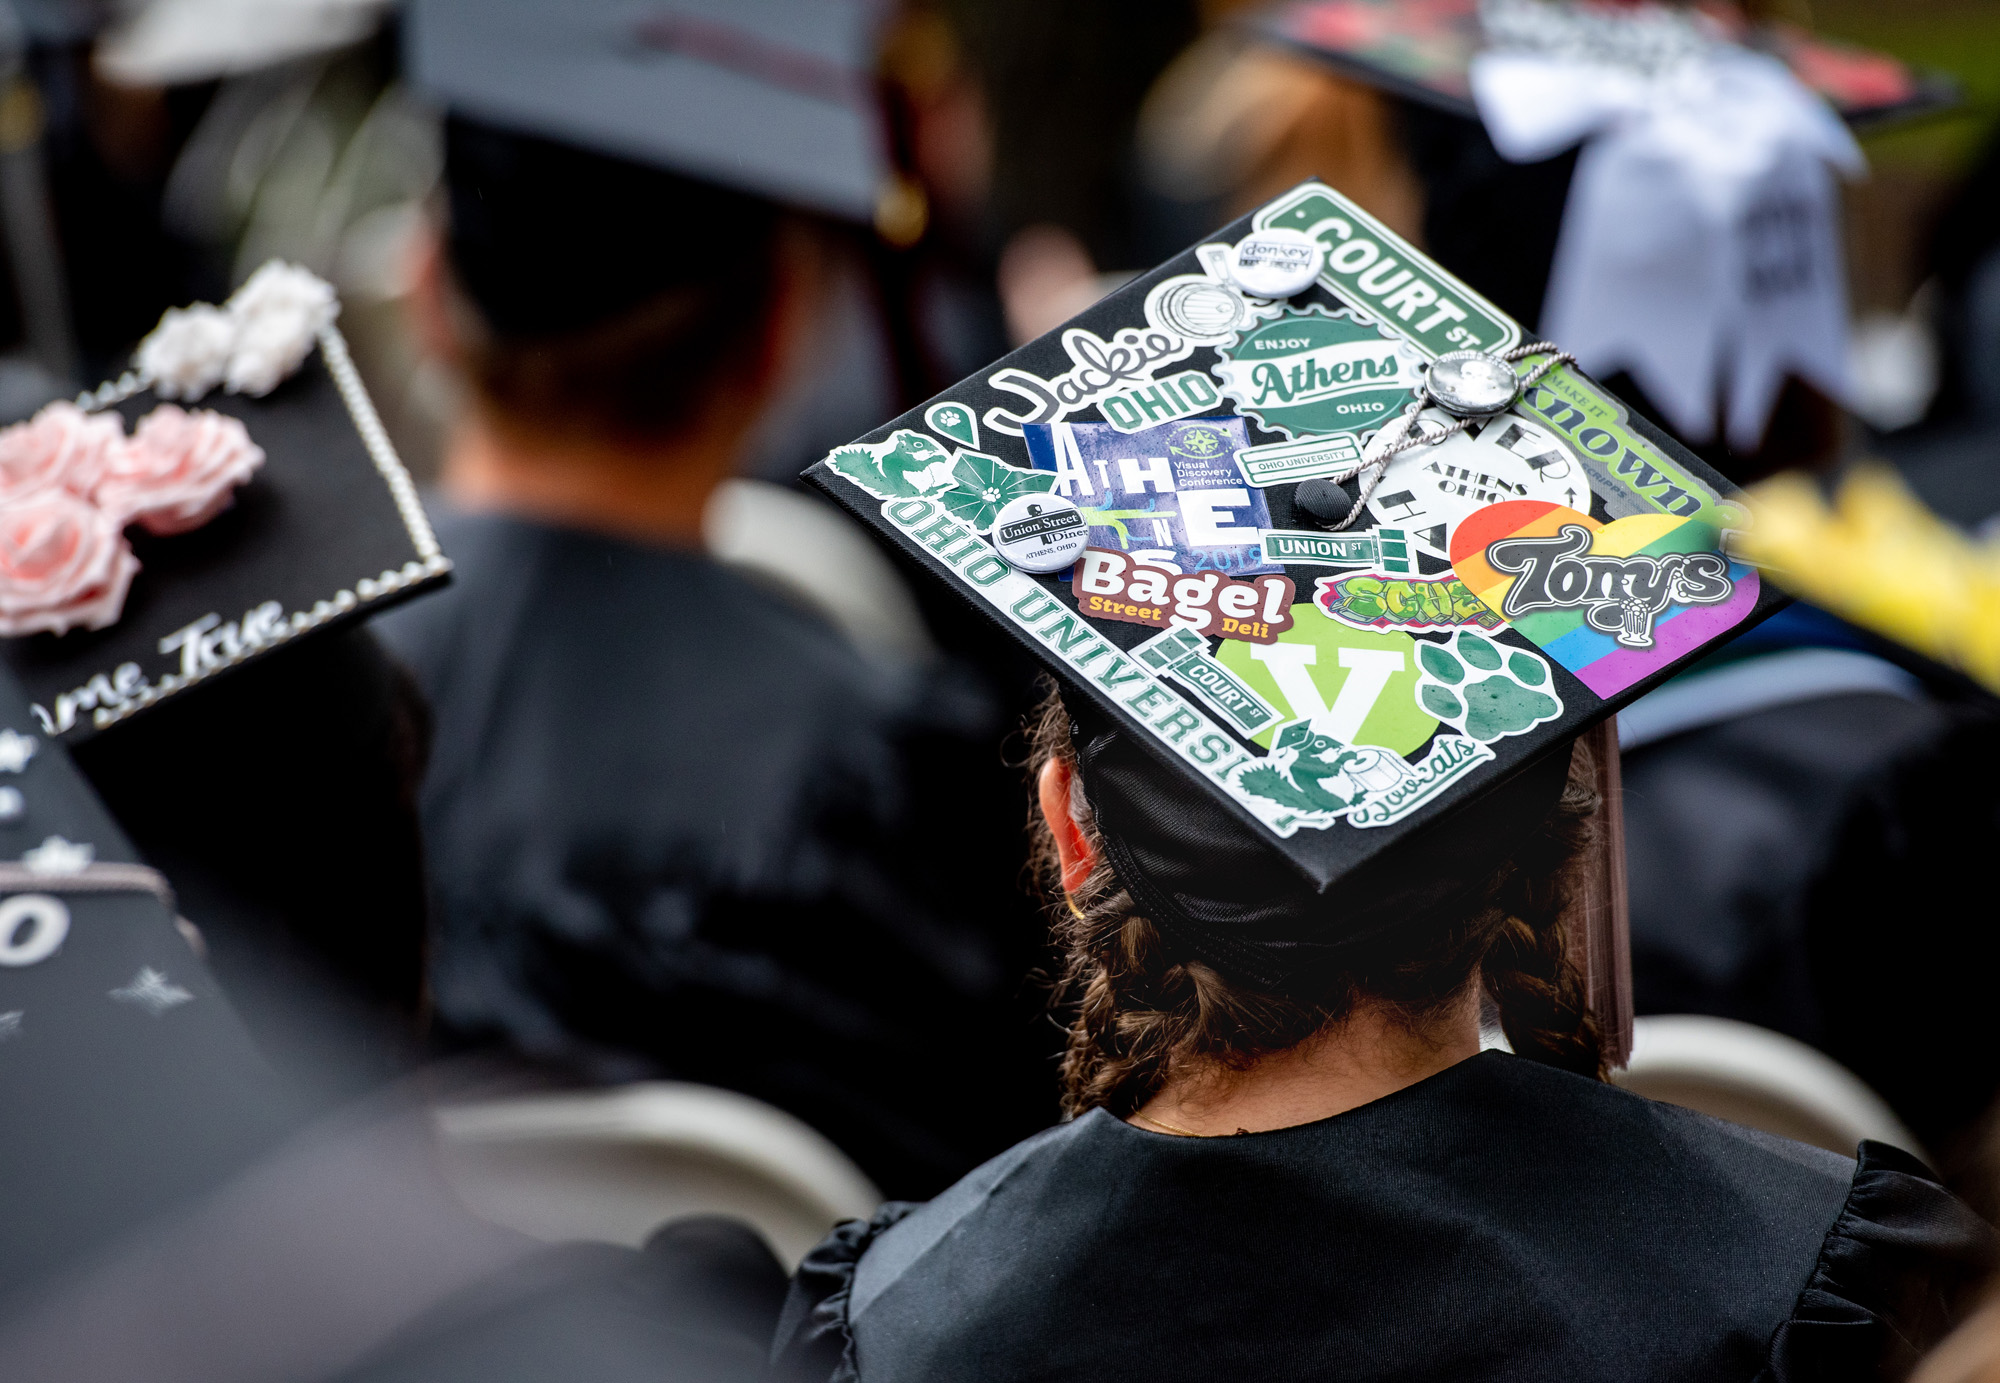 Ohio University holds Class of 2020 commencement